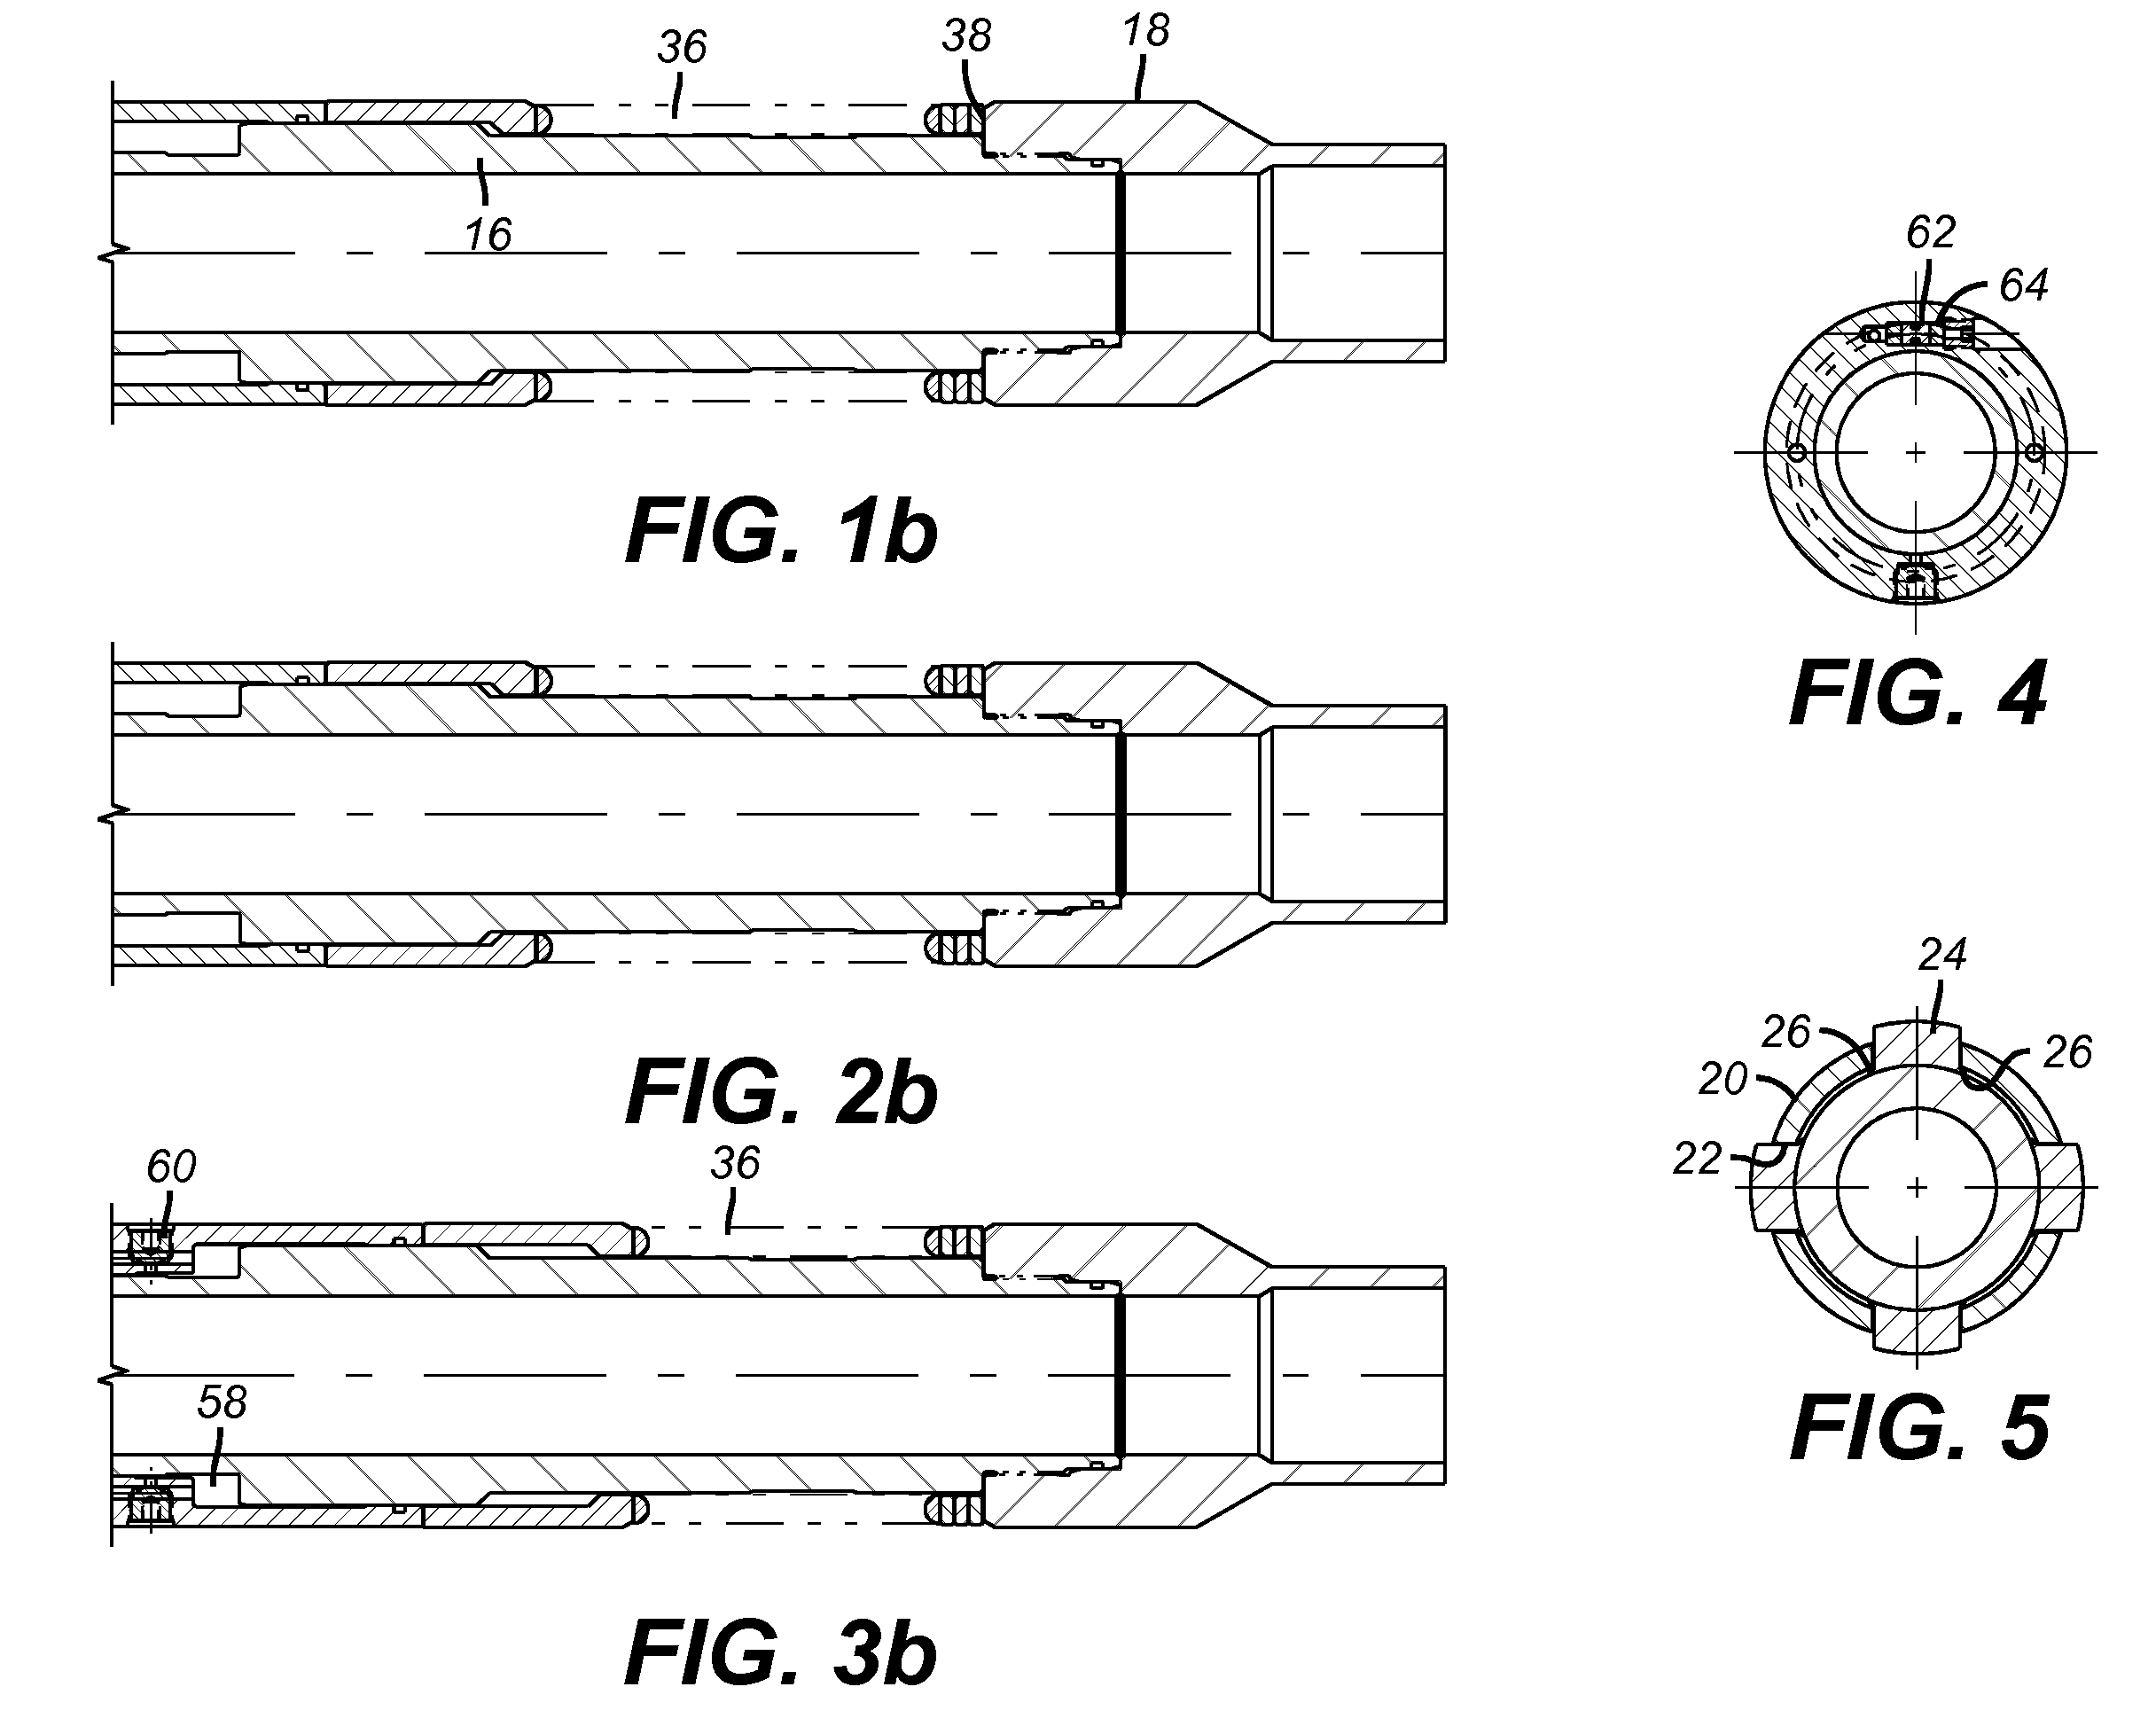 Downhole position locating device with fluid metering feature